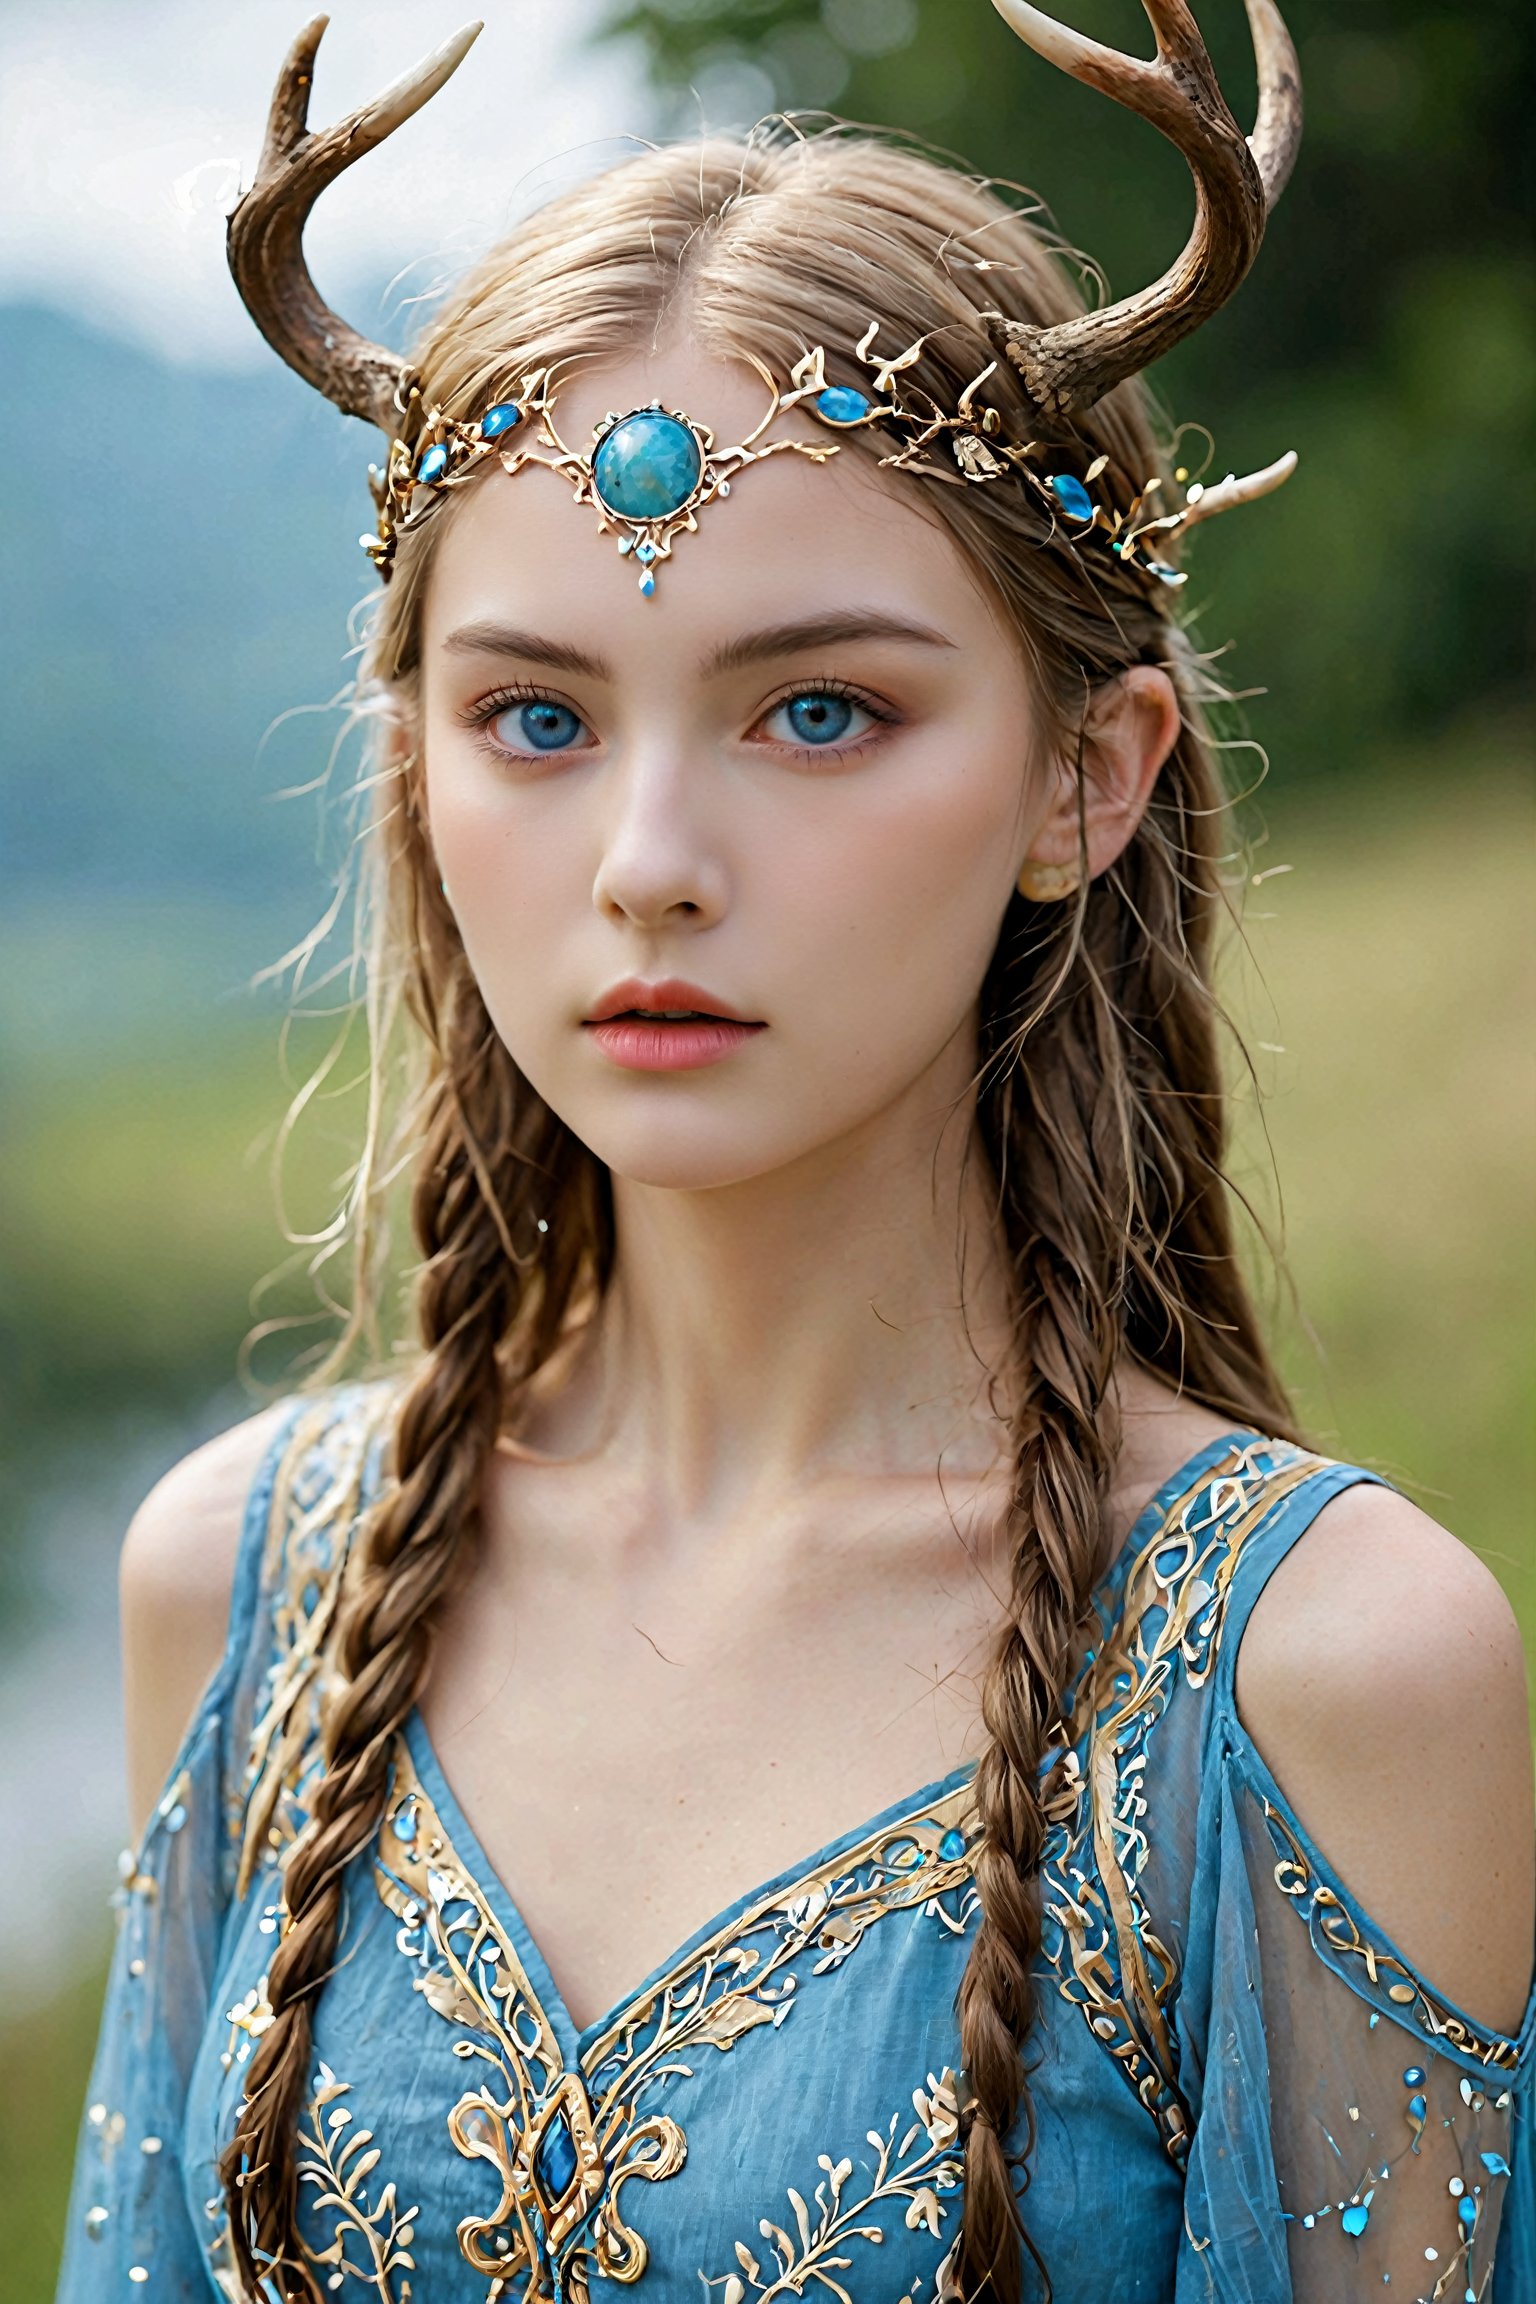 ancient Nordic legendary Young elf,(elf ear),(She wears a crown adorned with intricately carved antlers:1.2),mysteriously blue eyes, adding an air of mystique and wisdom. Her attire is a flowing ancient Germanic dress, crafted from natural fabrics and decorated with detailed embroidery and runic symbols. The dress features earthy tones and elaborate patterns that reflect her deep roots in nature and lore.,Lace Blindfold,IMGFIX,zavy-hrglw,Realistic Blue Eyes,gl1tt3rsk1n